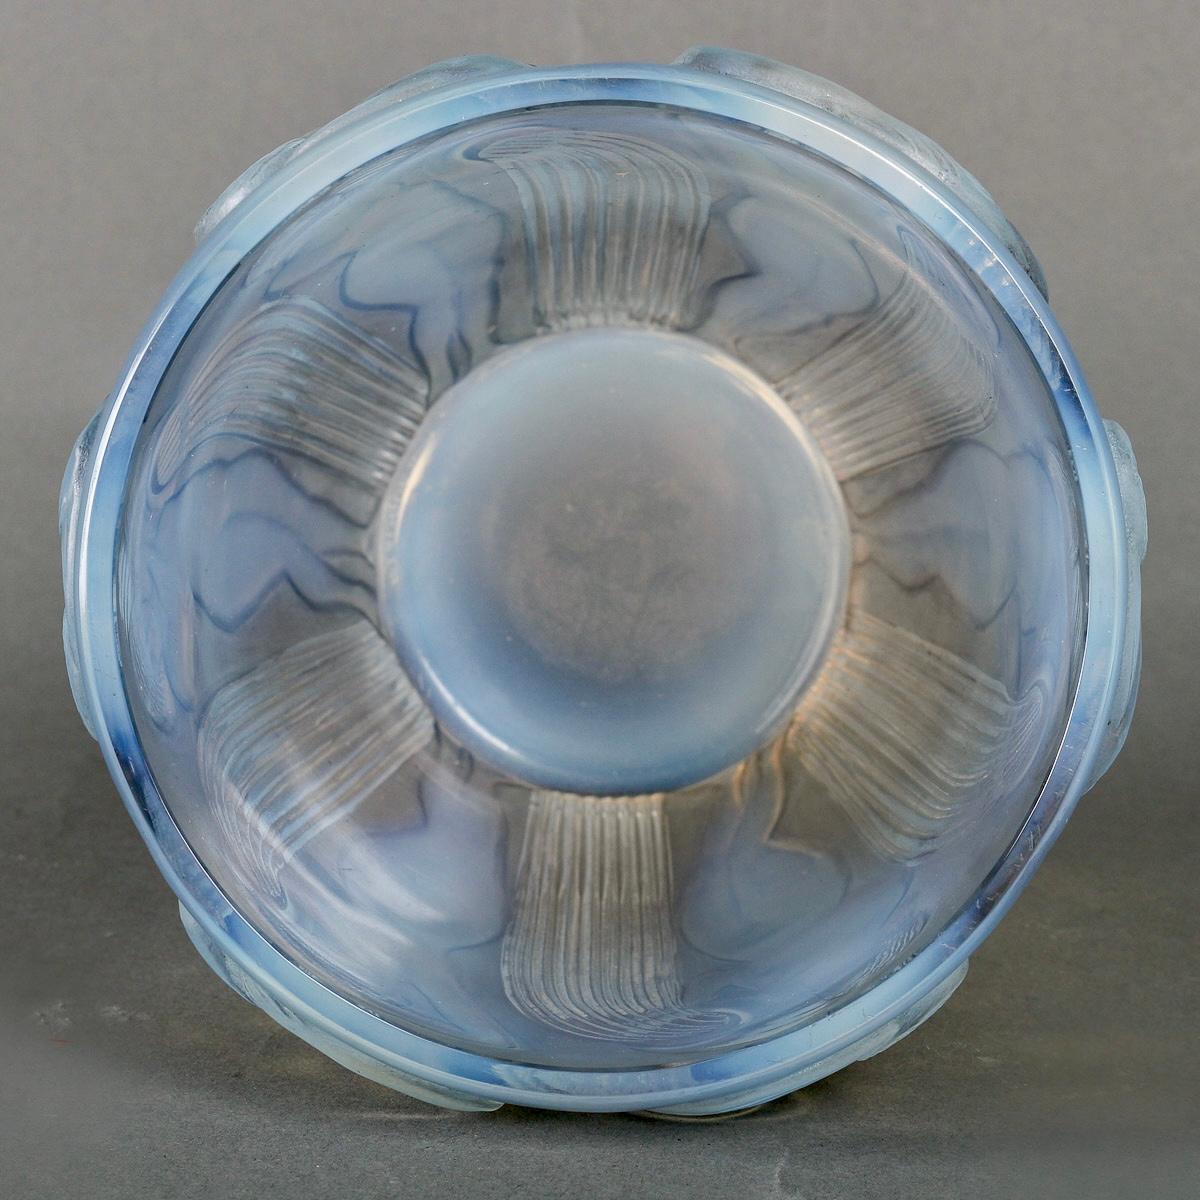 Molded 1926 Rene Lalique Vase Danaides Opalescent Glass Grey Patina, Pouring Women For Sale